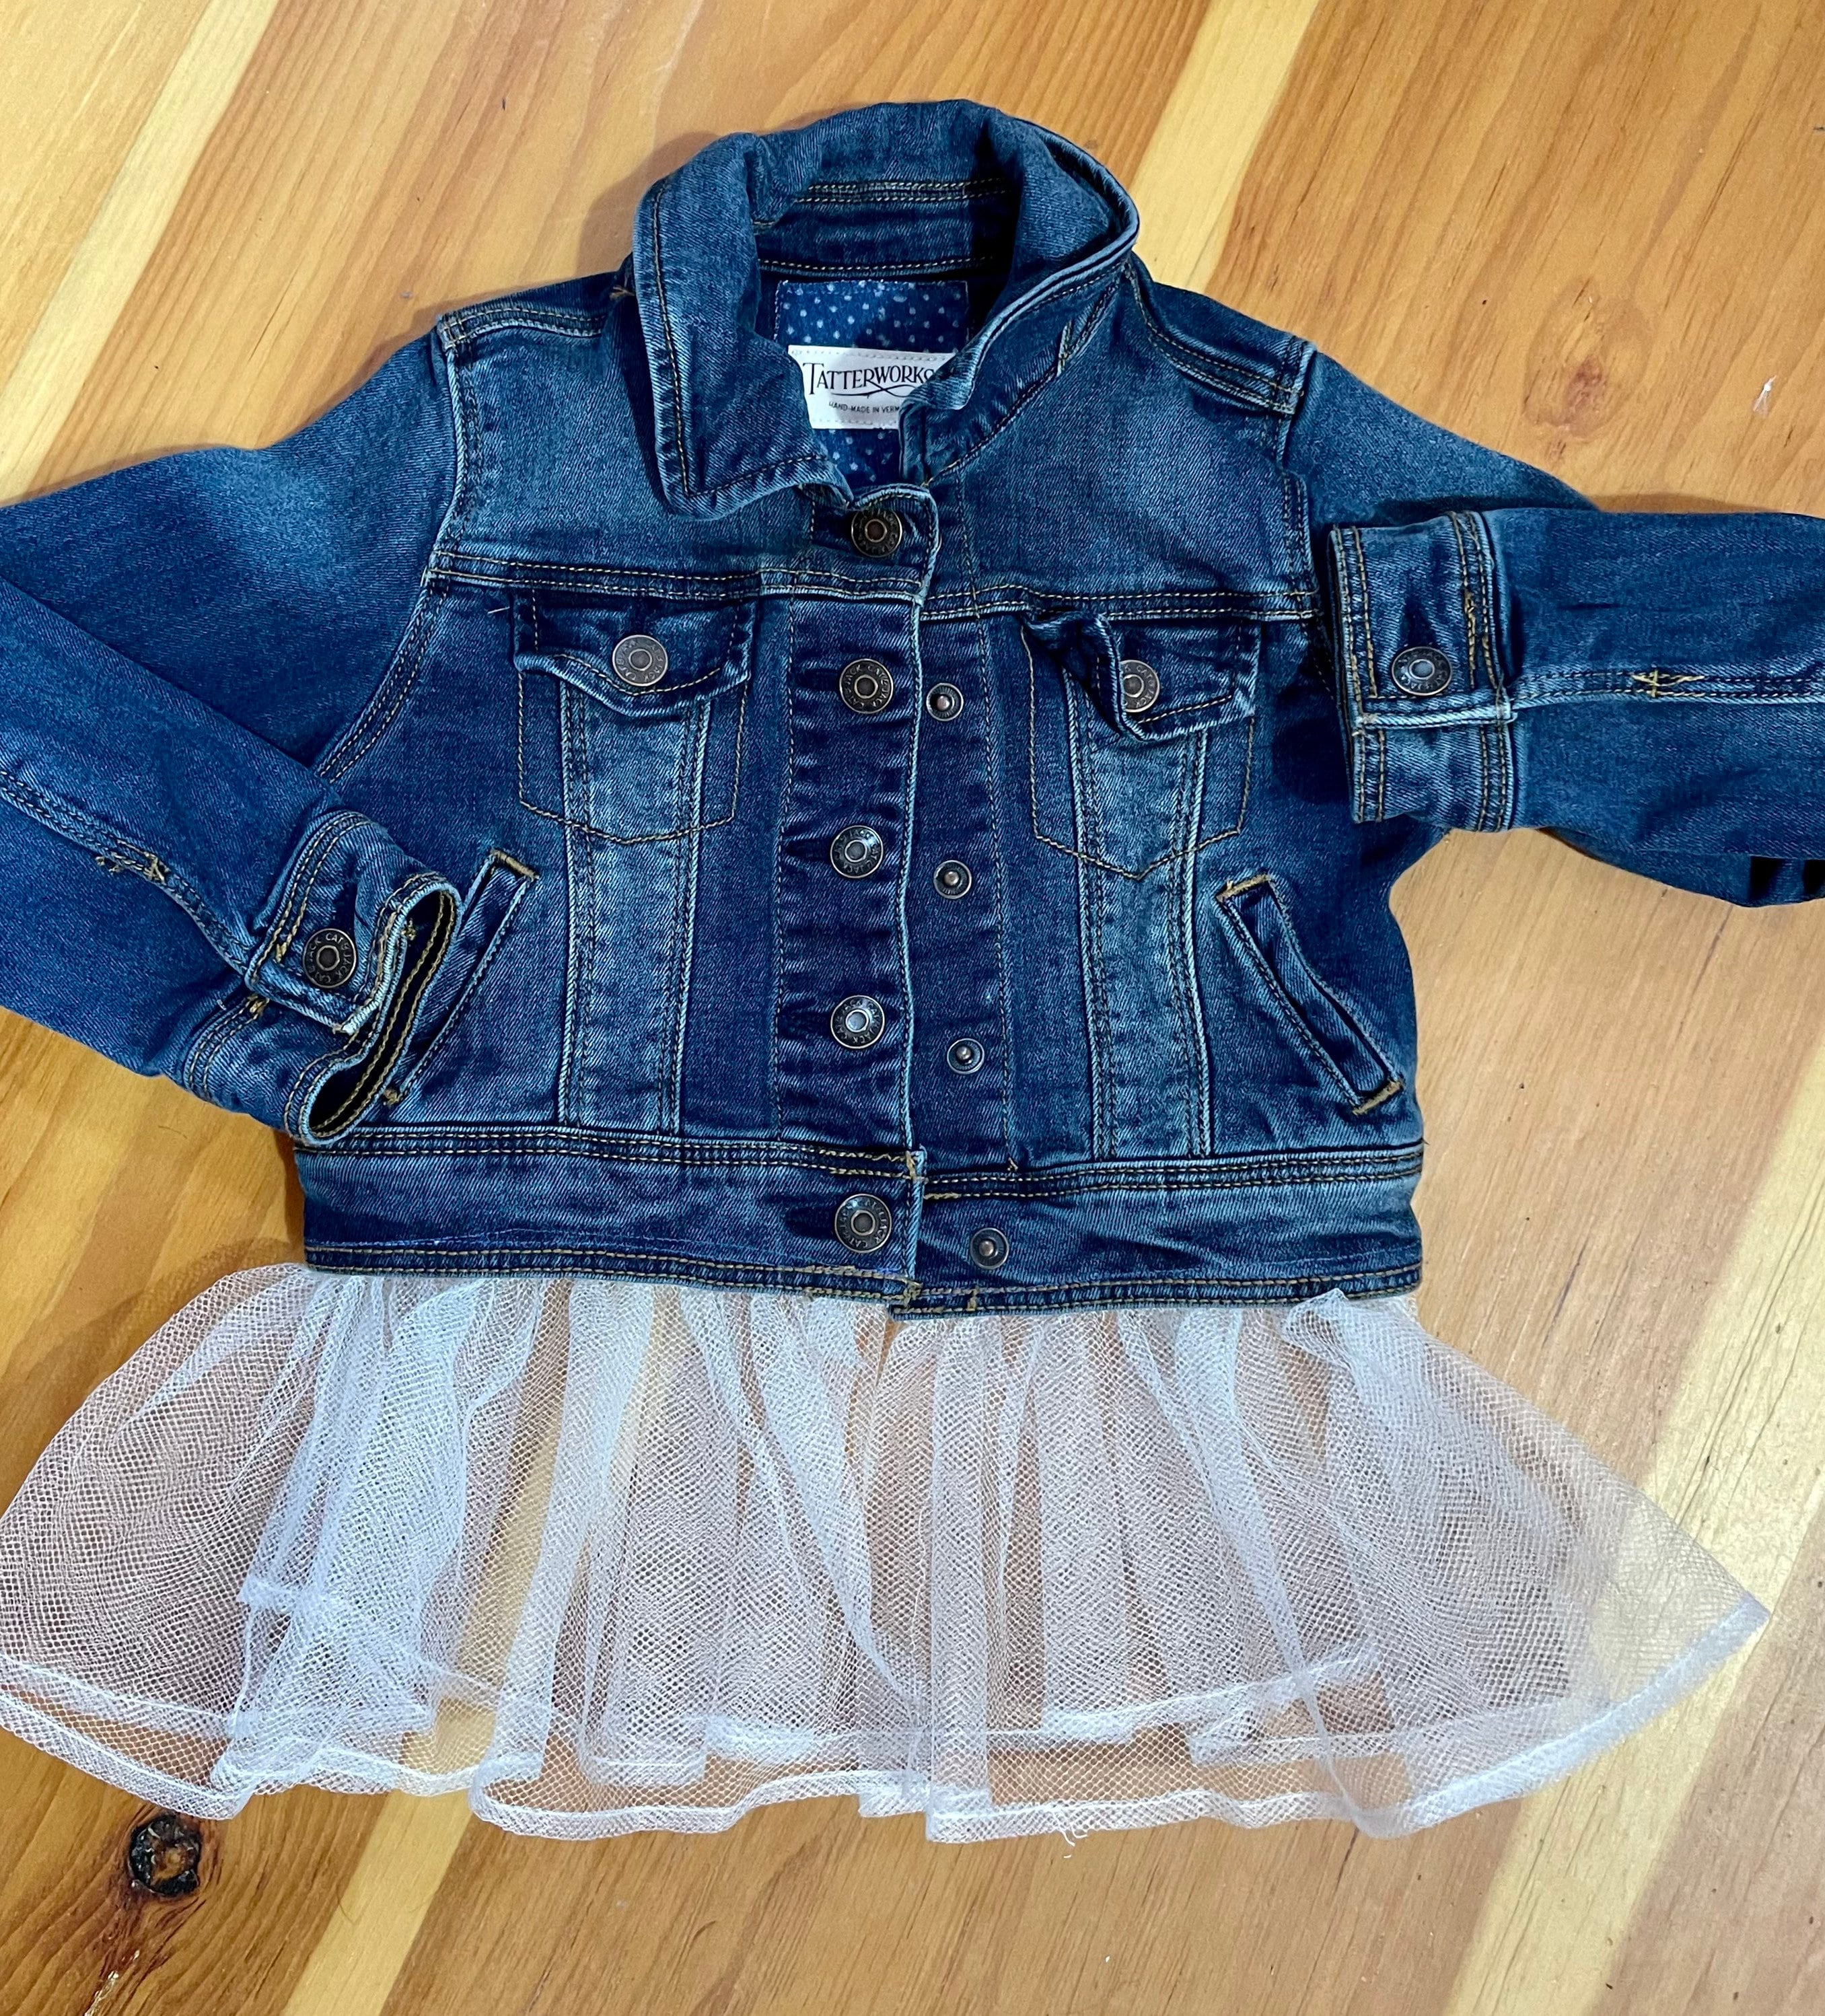 Tatterworks Upcycled Recycled Repurposed Girls Denim Jacket and Tulle Skirt. Size 6 Chest 26.